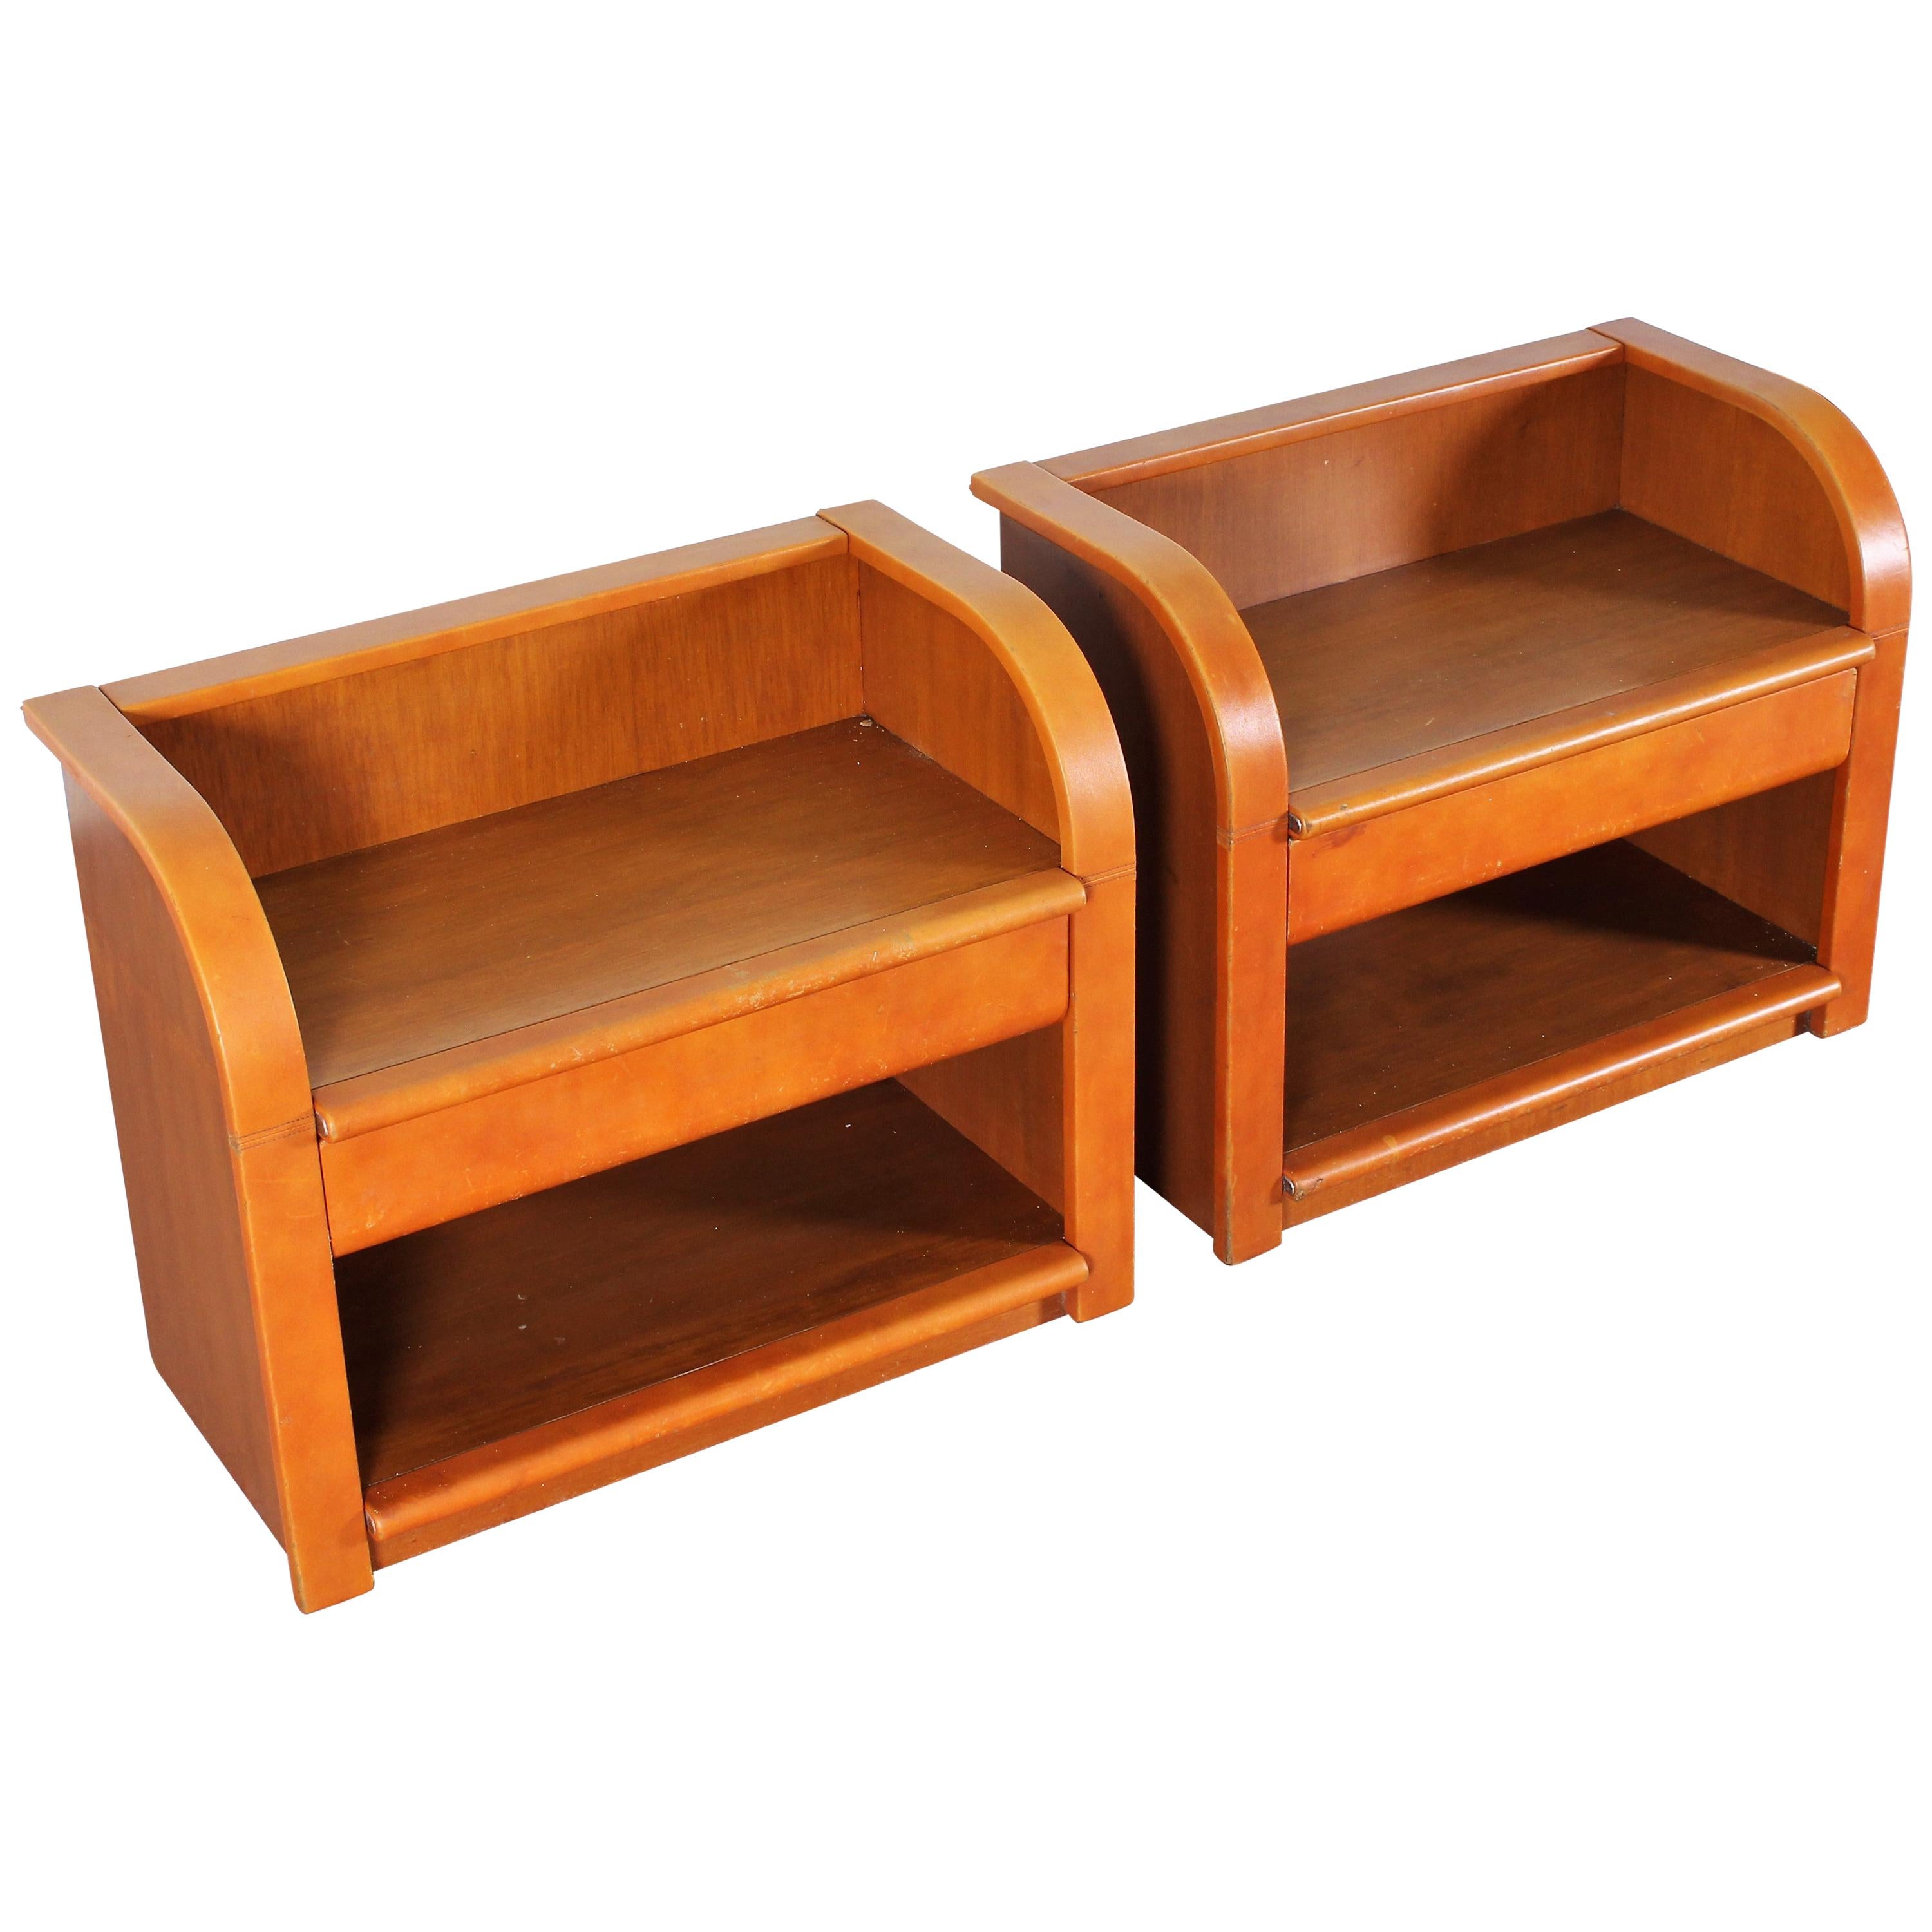 Midcentury Wood and Leather Poltrona Frau Nightstands, Set of 2, Italy, 1960s